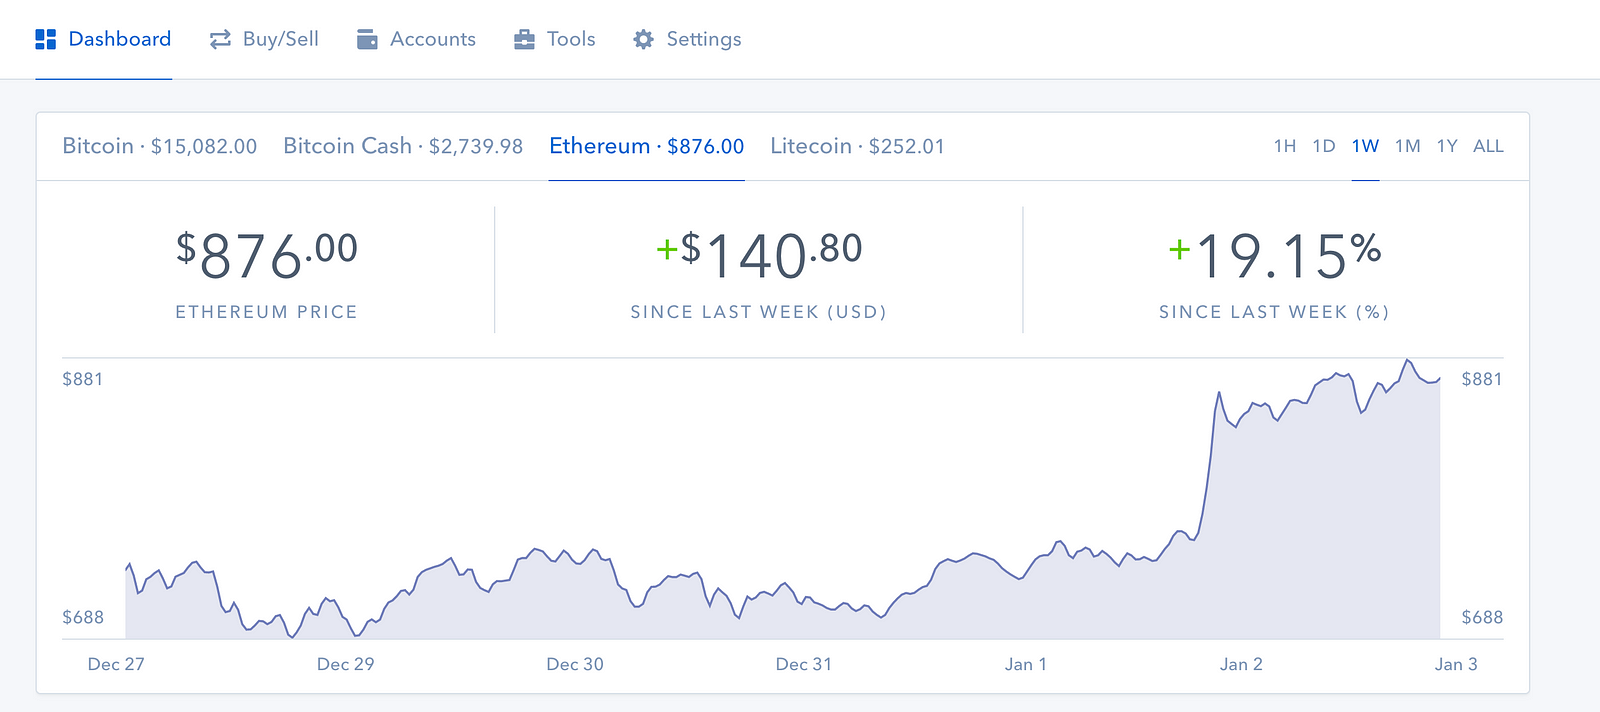 does coinbase tell you your average price